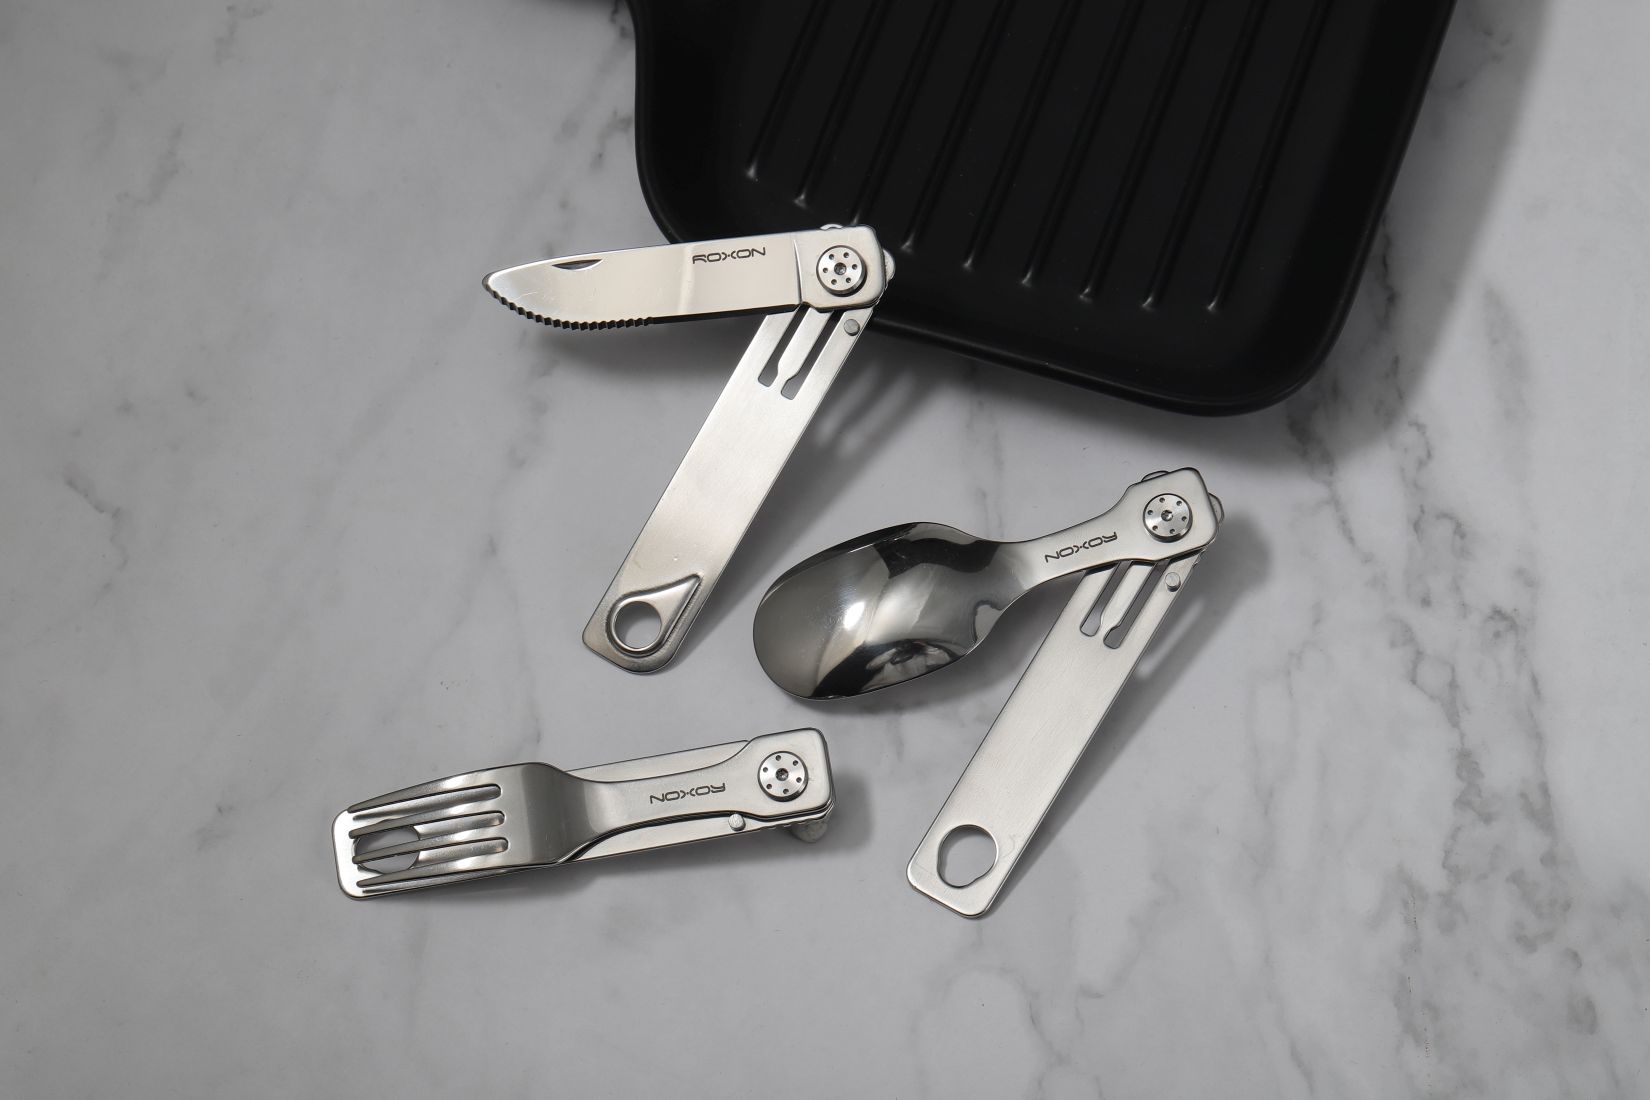 Foldable cutlery from Roxon - only 10cm long when folded